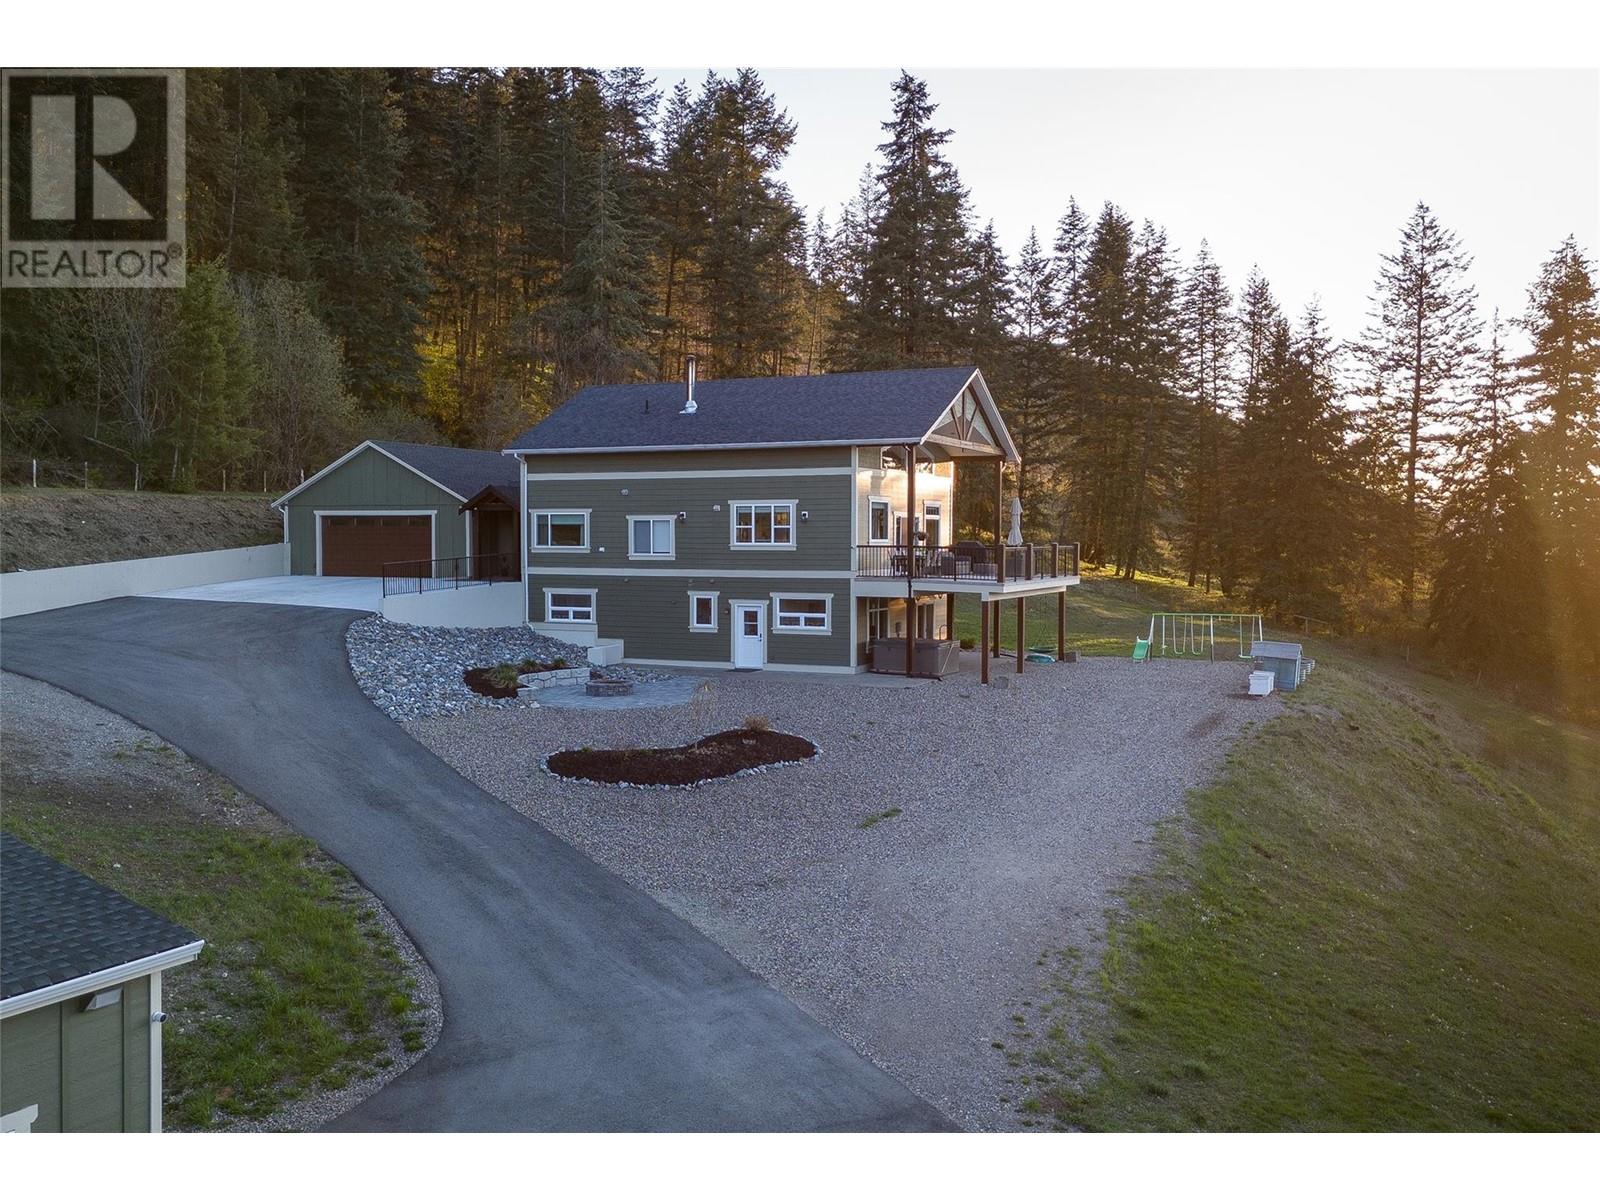  7090 Brewer Road, Coldstream